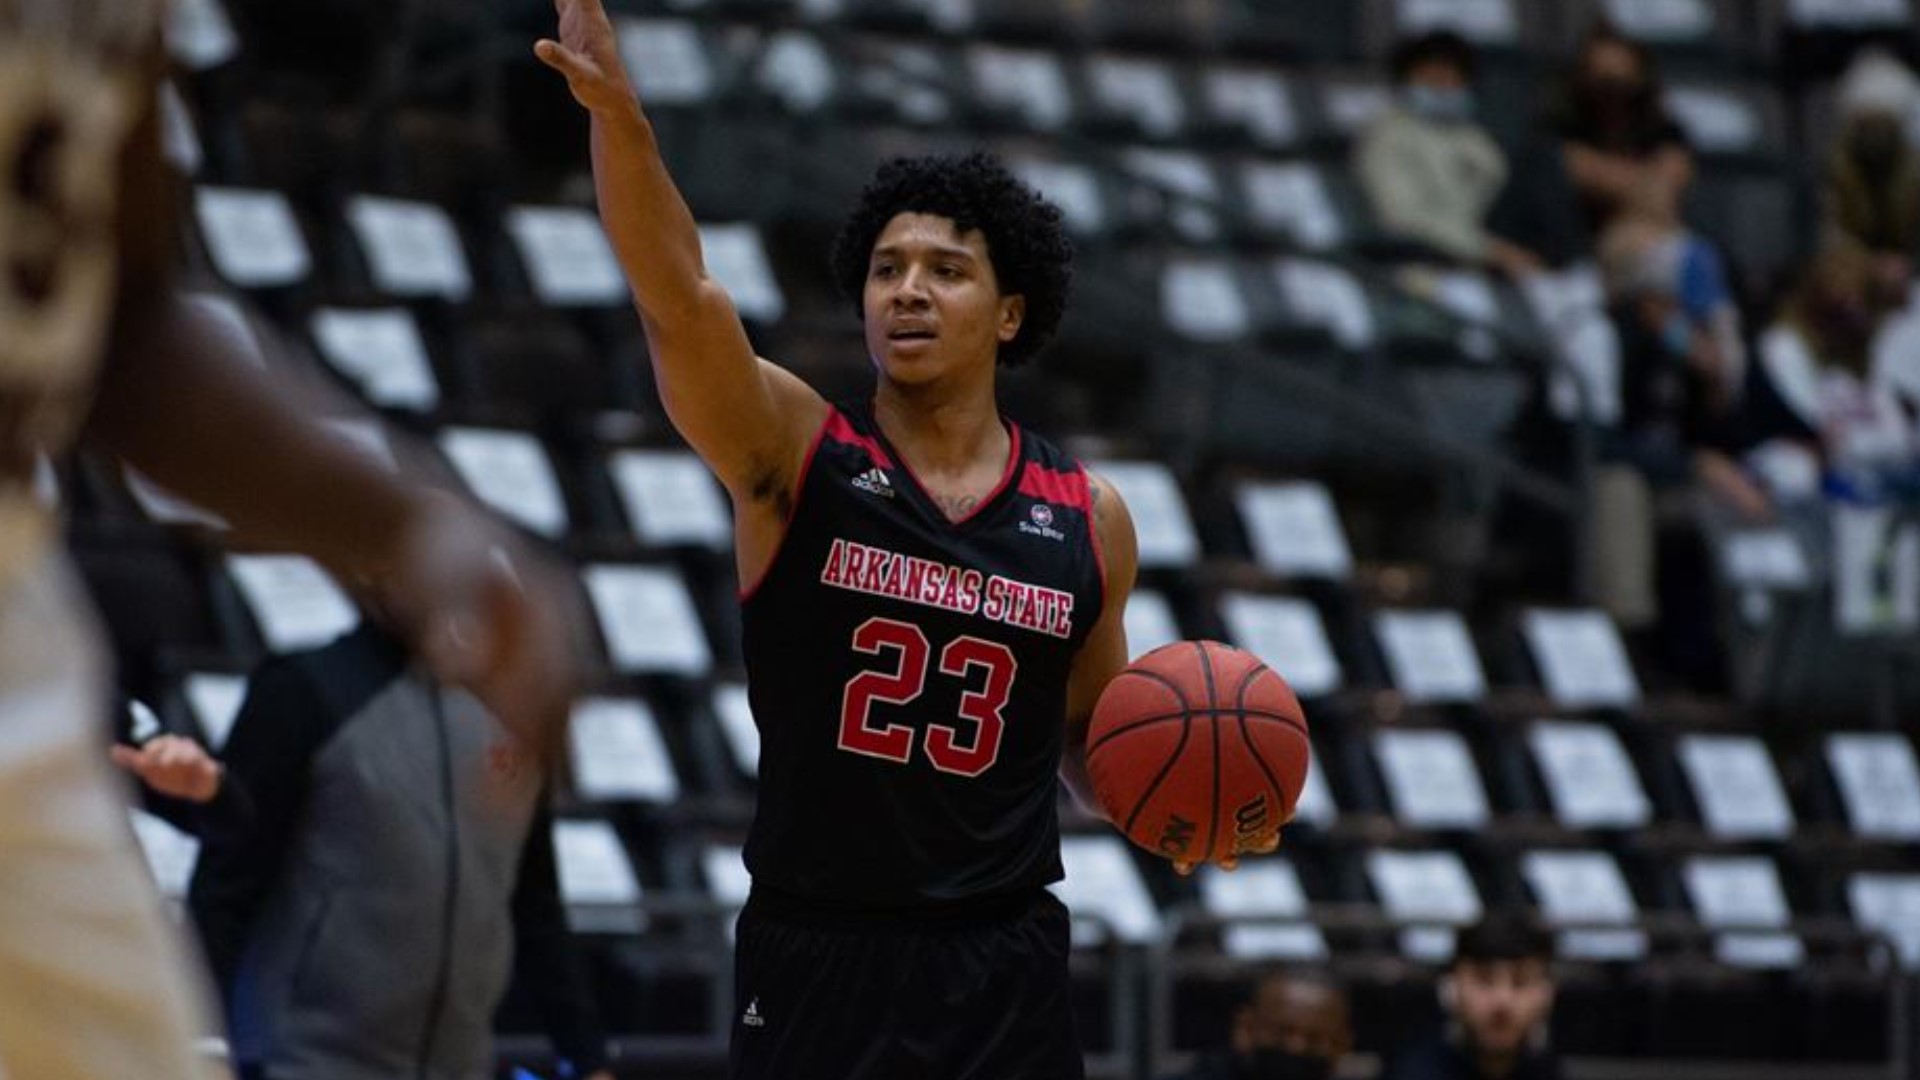 A fade-away jumper by Christian Willis with 12 seconds remaining was what Arkansas State men's basketball needed to oust Little Rock 67-65 and get the series sweep